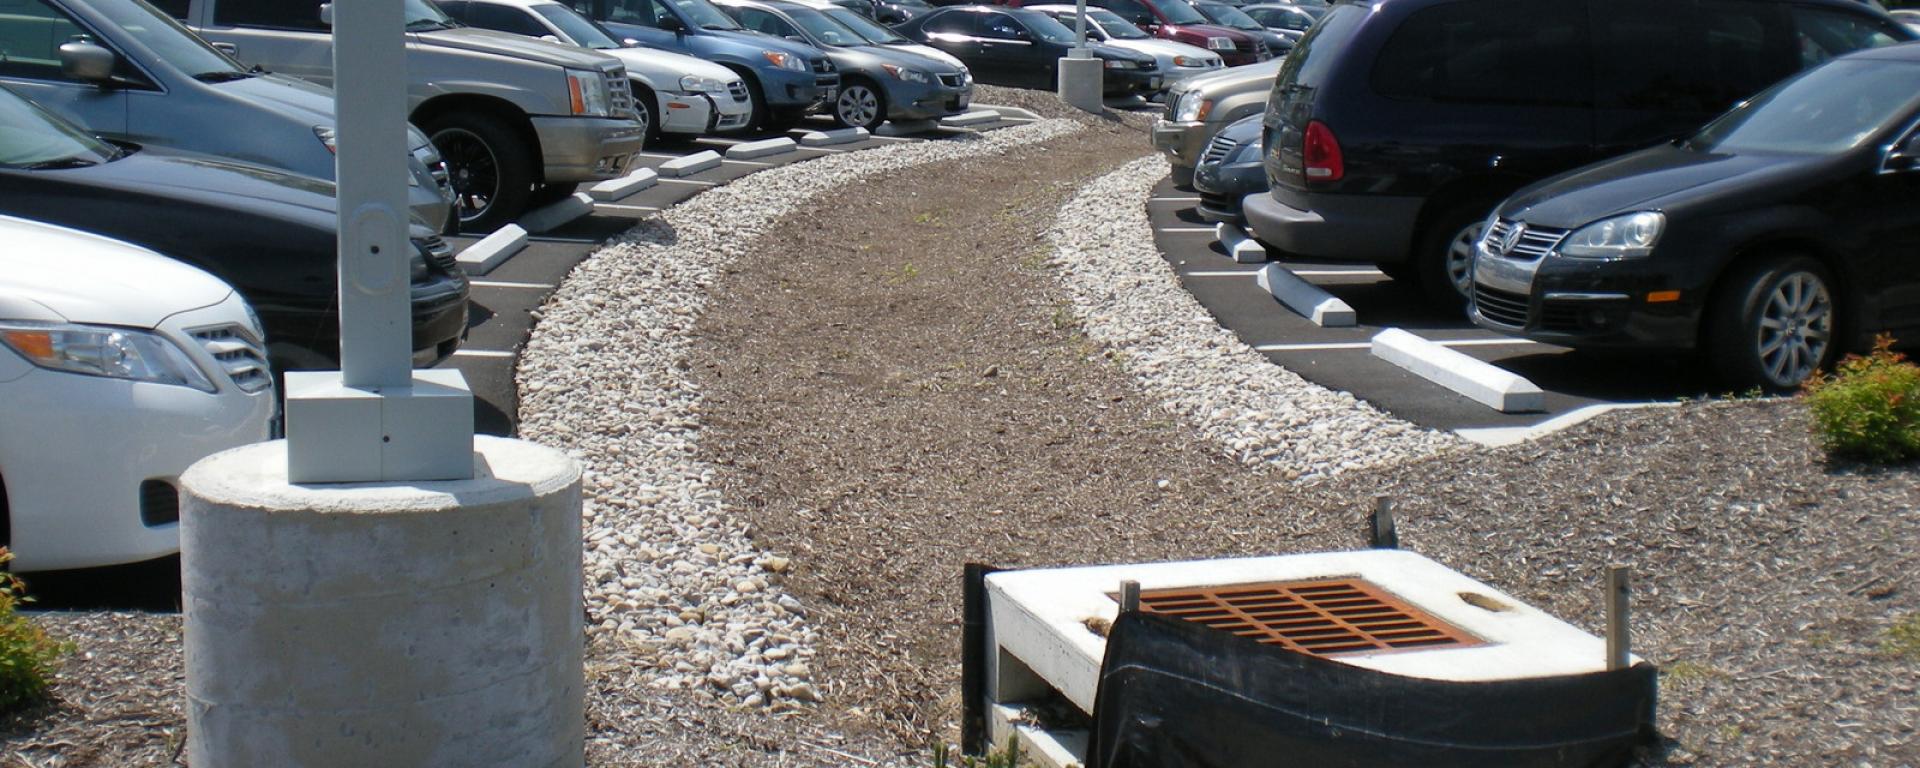 drainage in parking lot